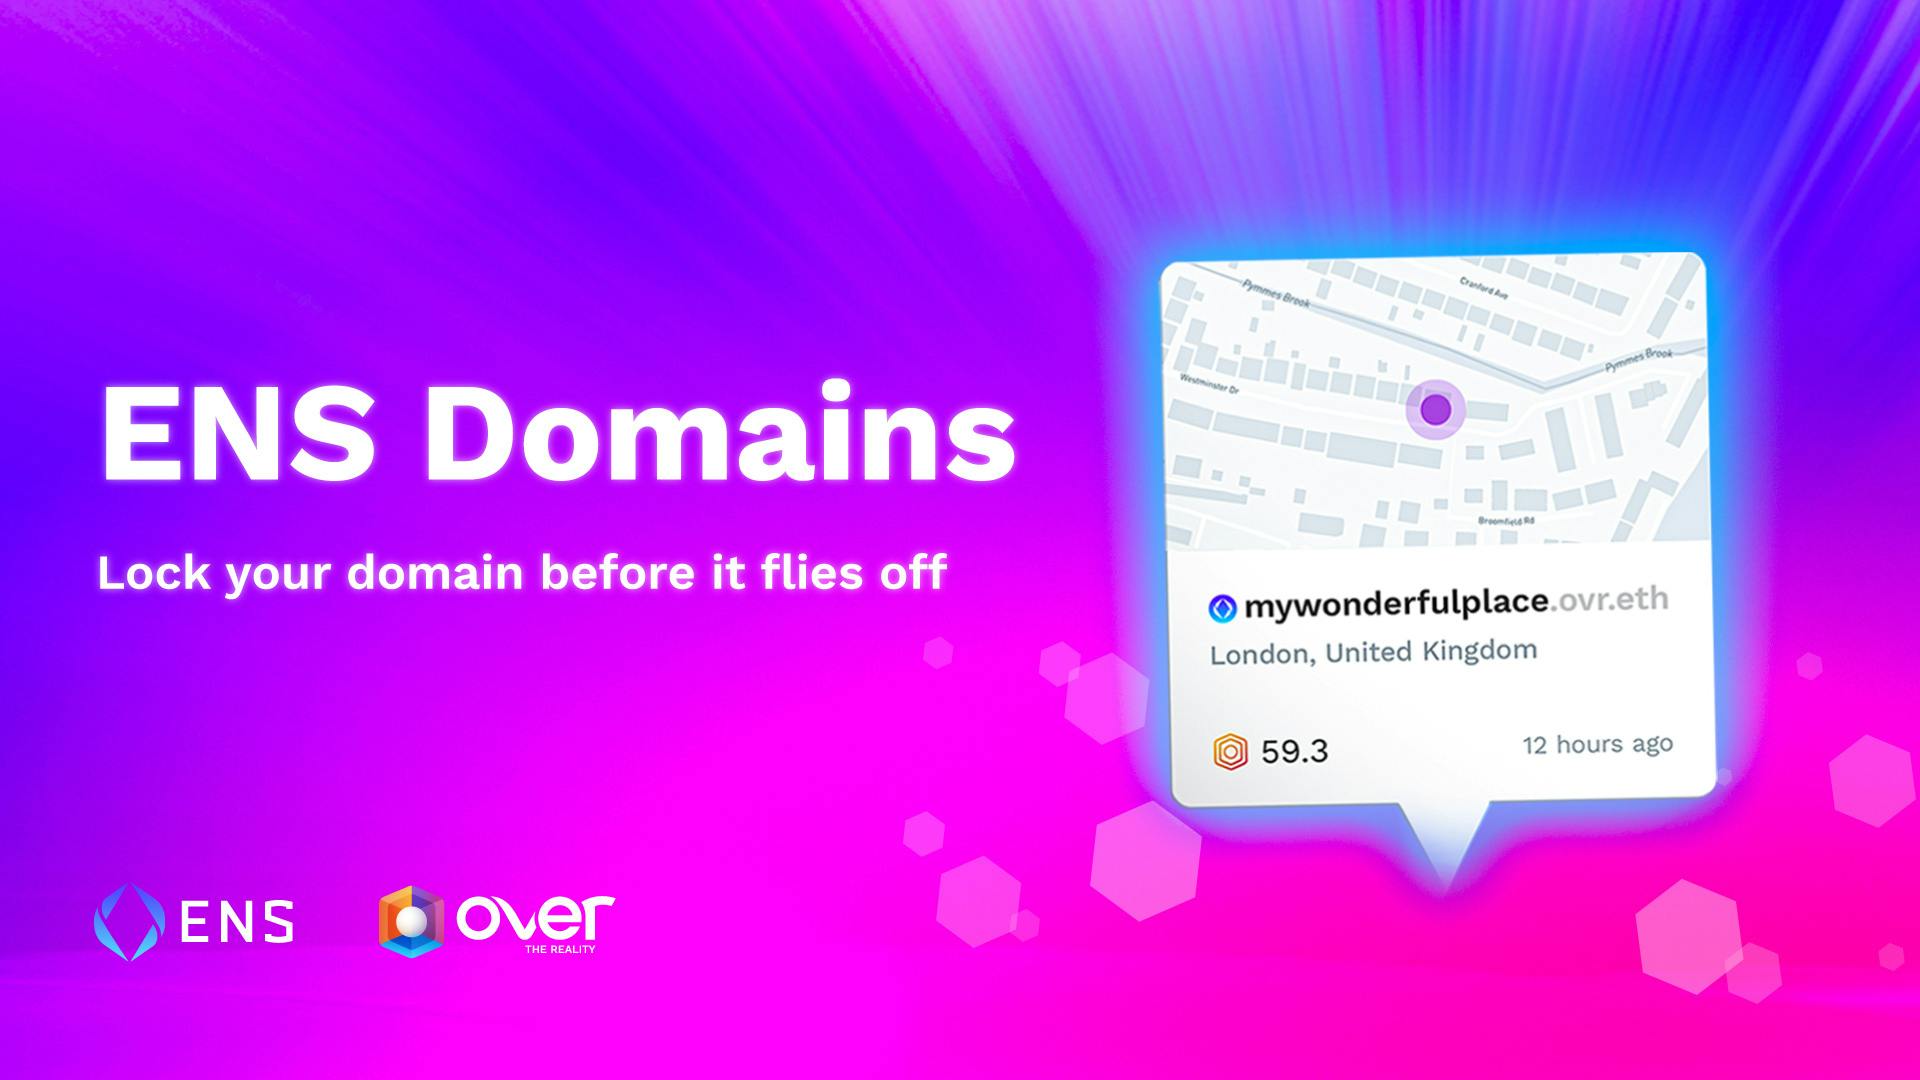 ENS domains are now available in the OVER Marketplace.